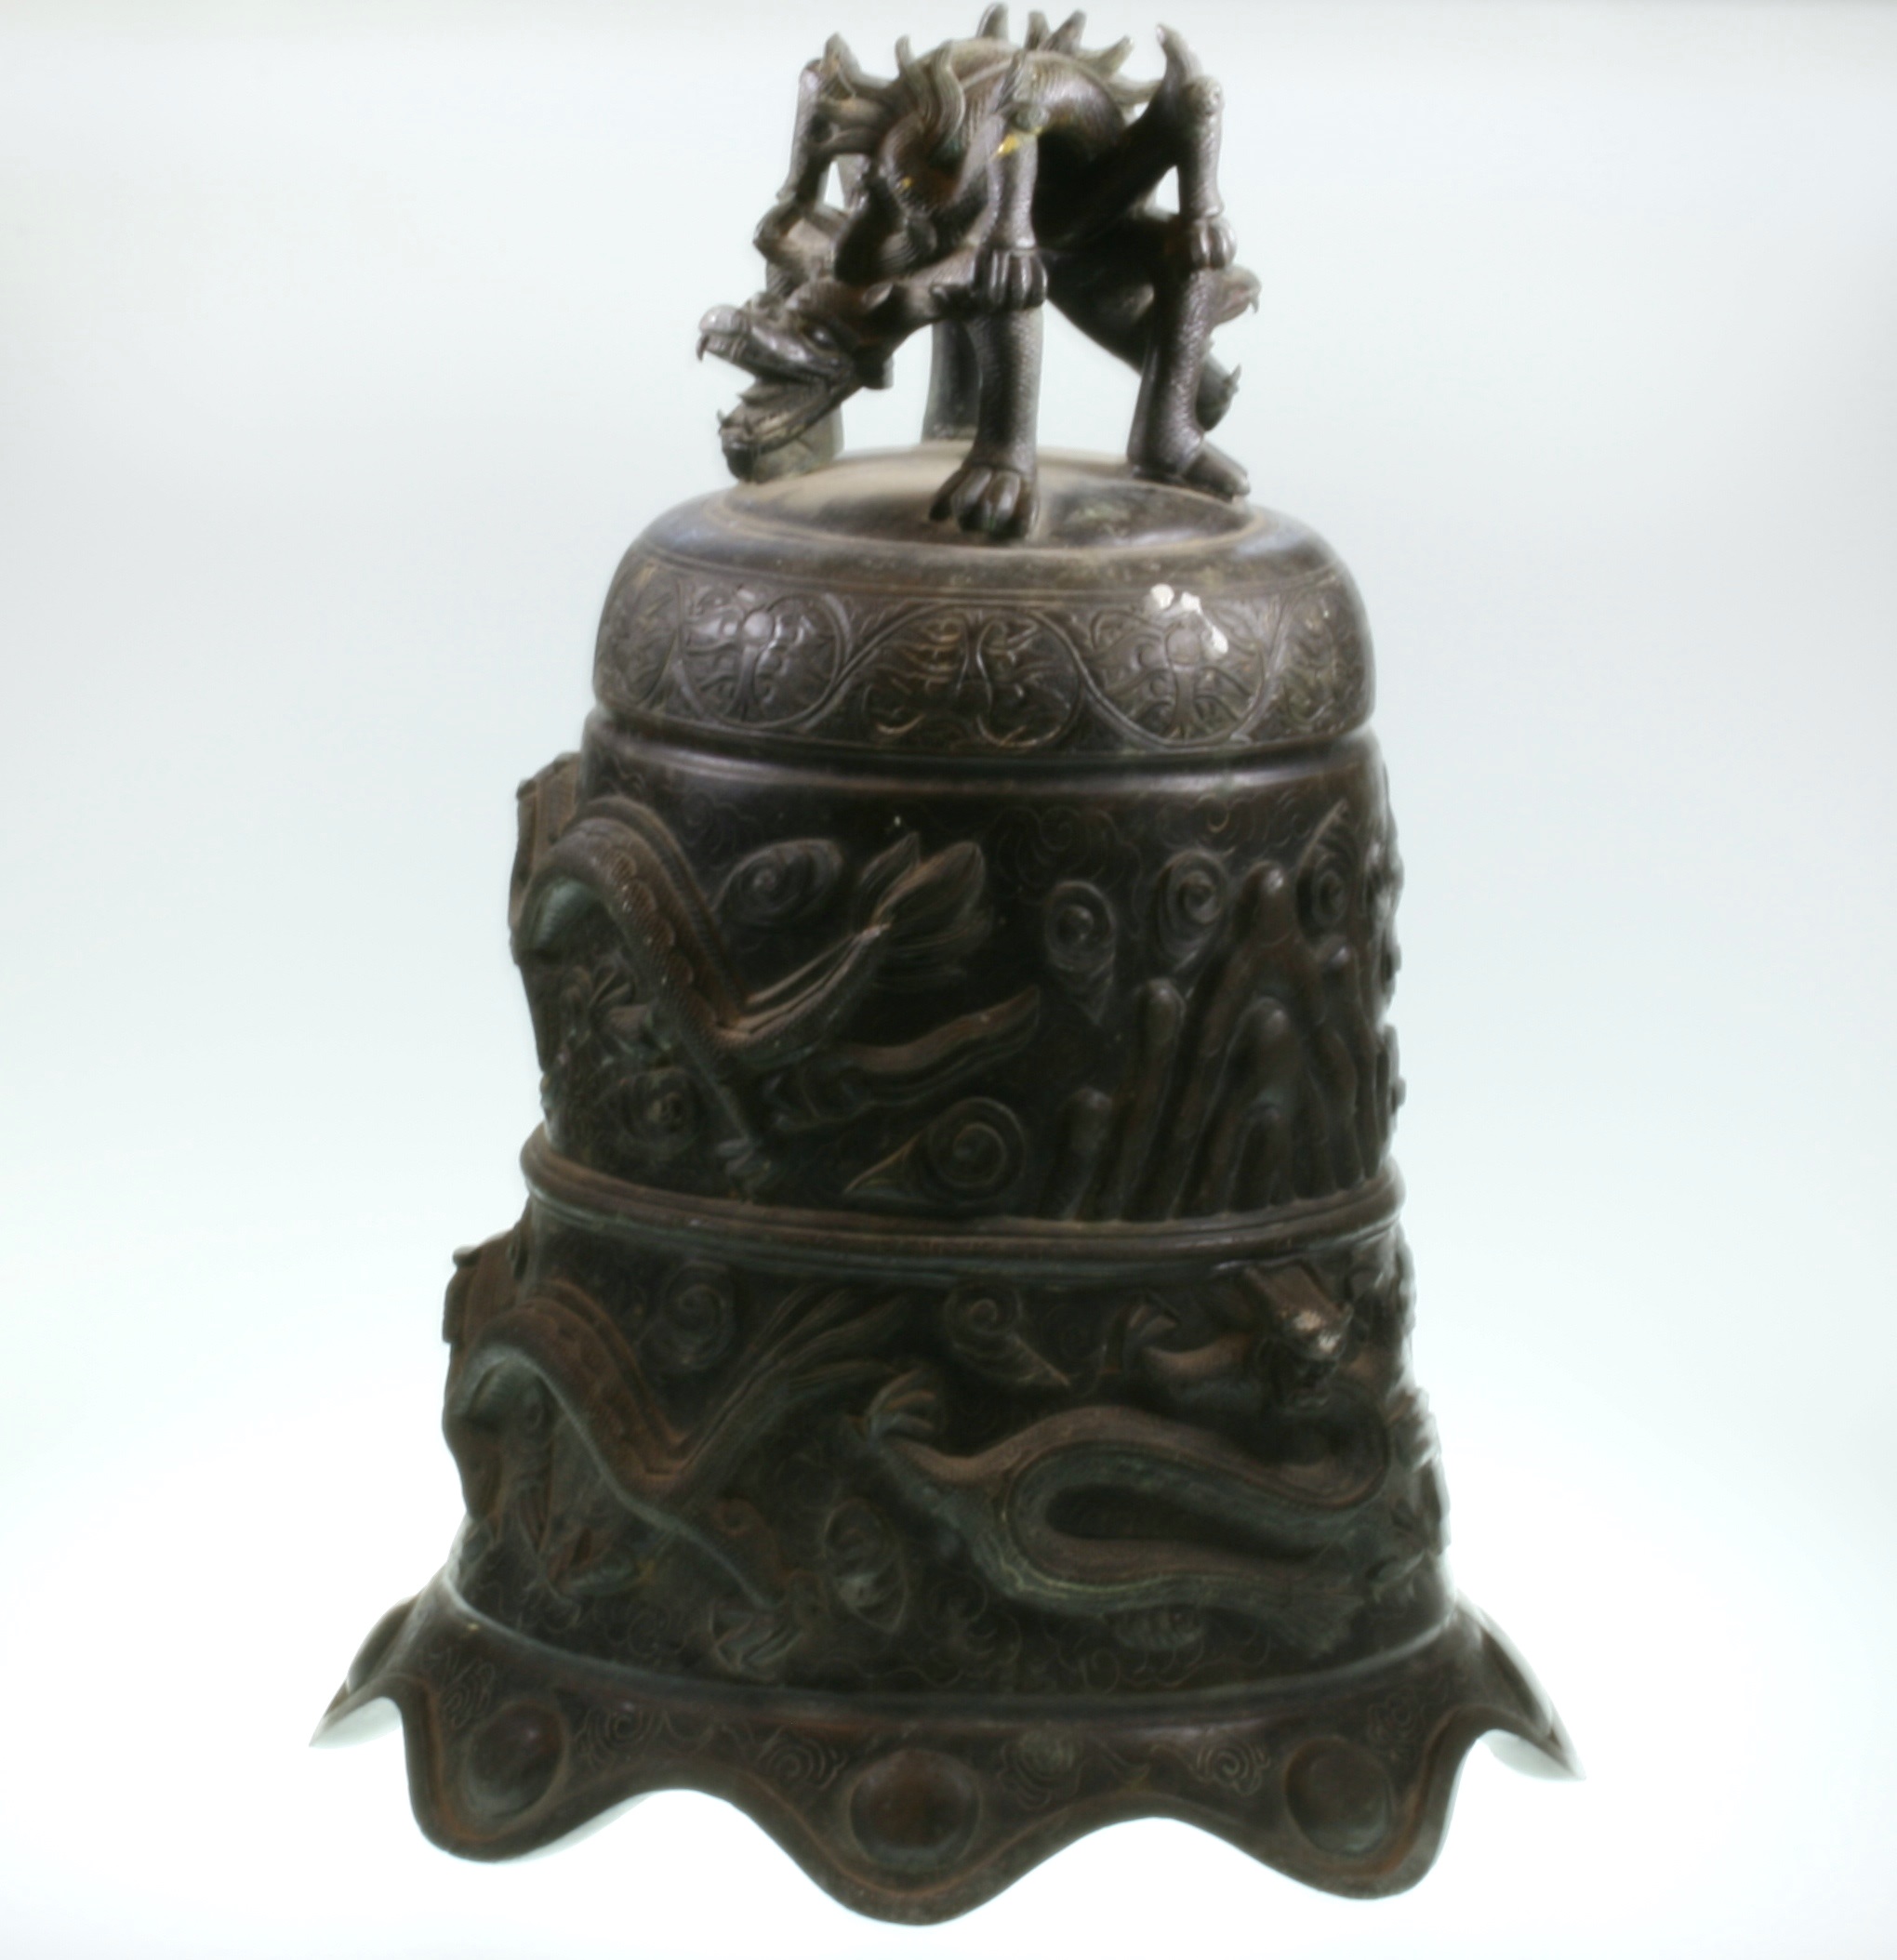 An Oriental Antique Bronze Temple Bell. 19th century or older. Cast with dragons amidst cloud